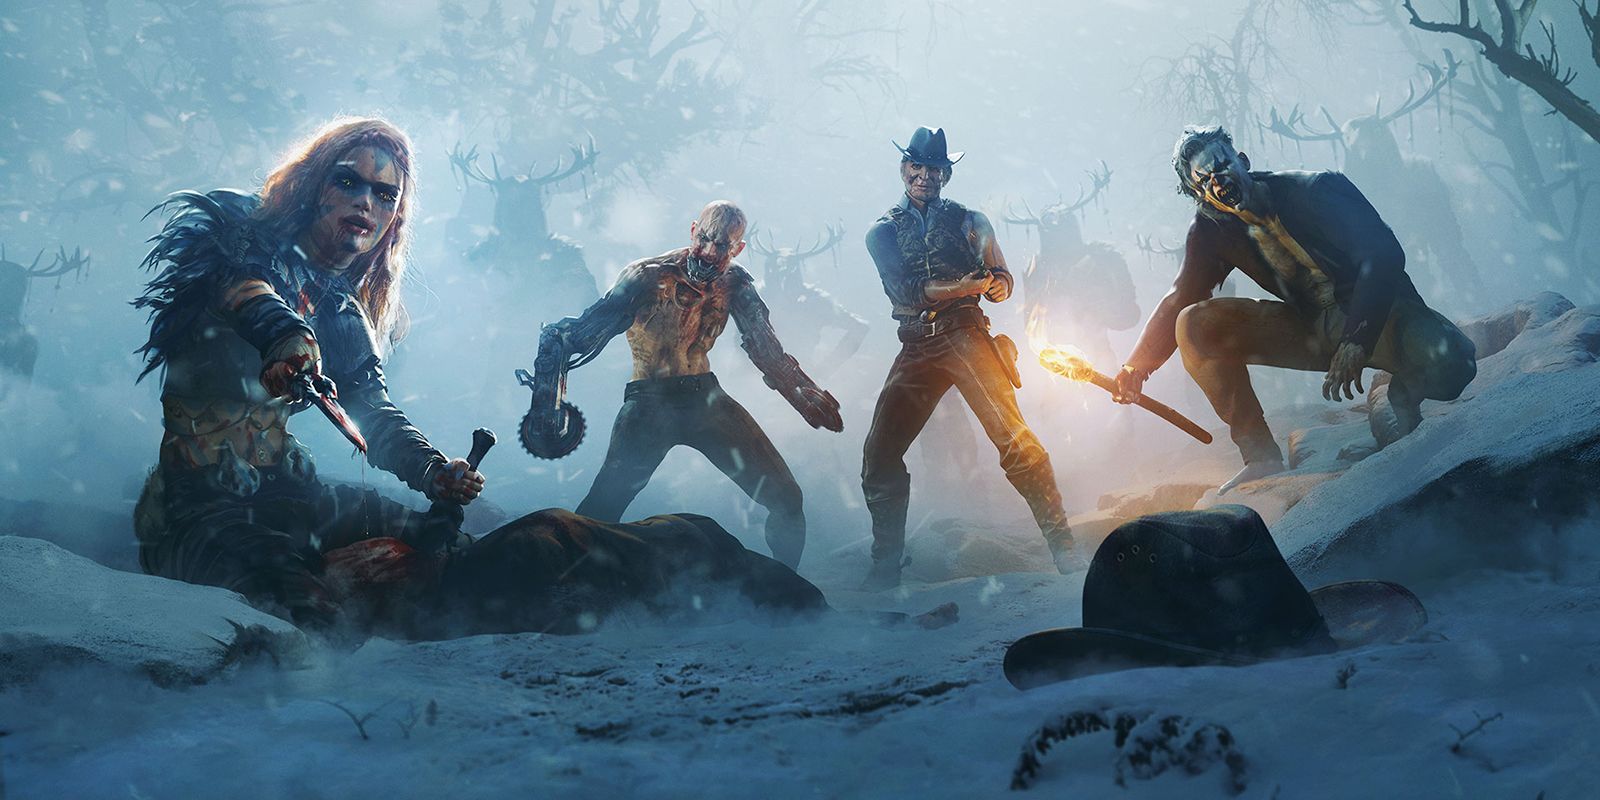 Wasteland 3 Preview: A Warm Reception For A Frosty Apocalypse